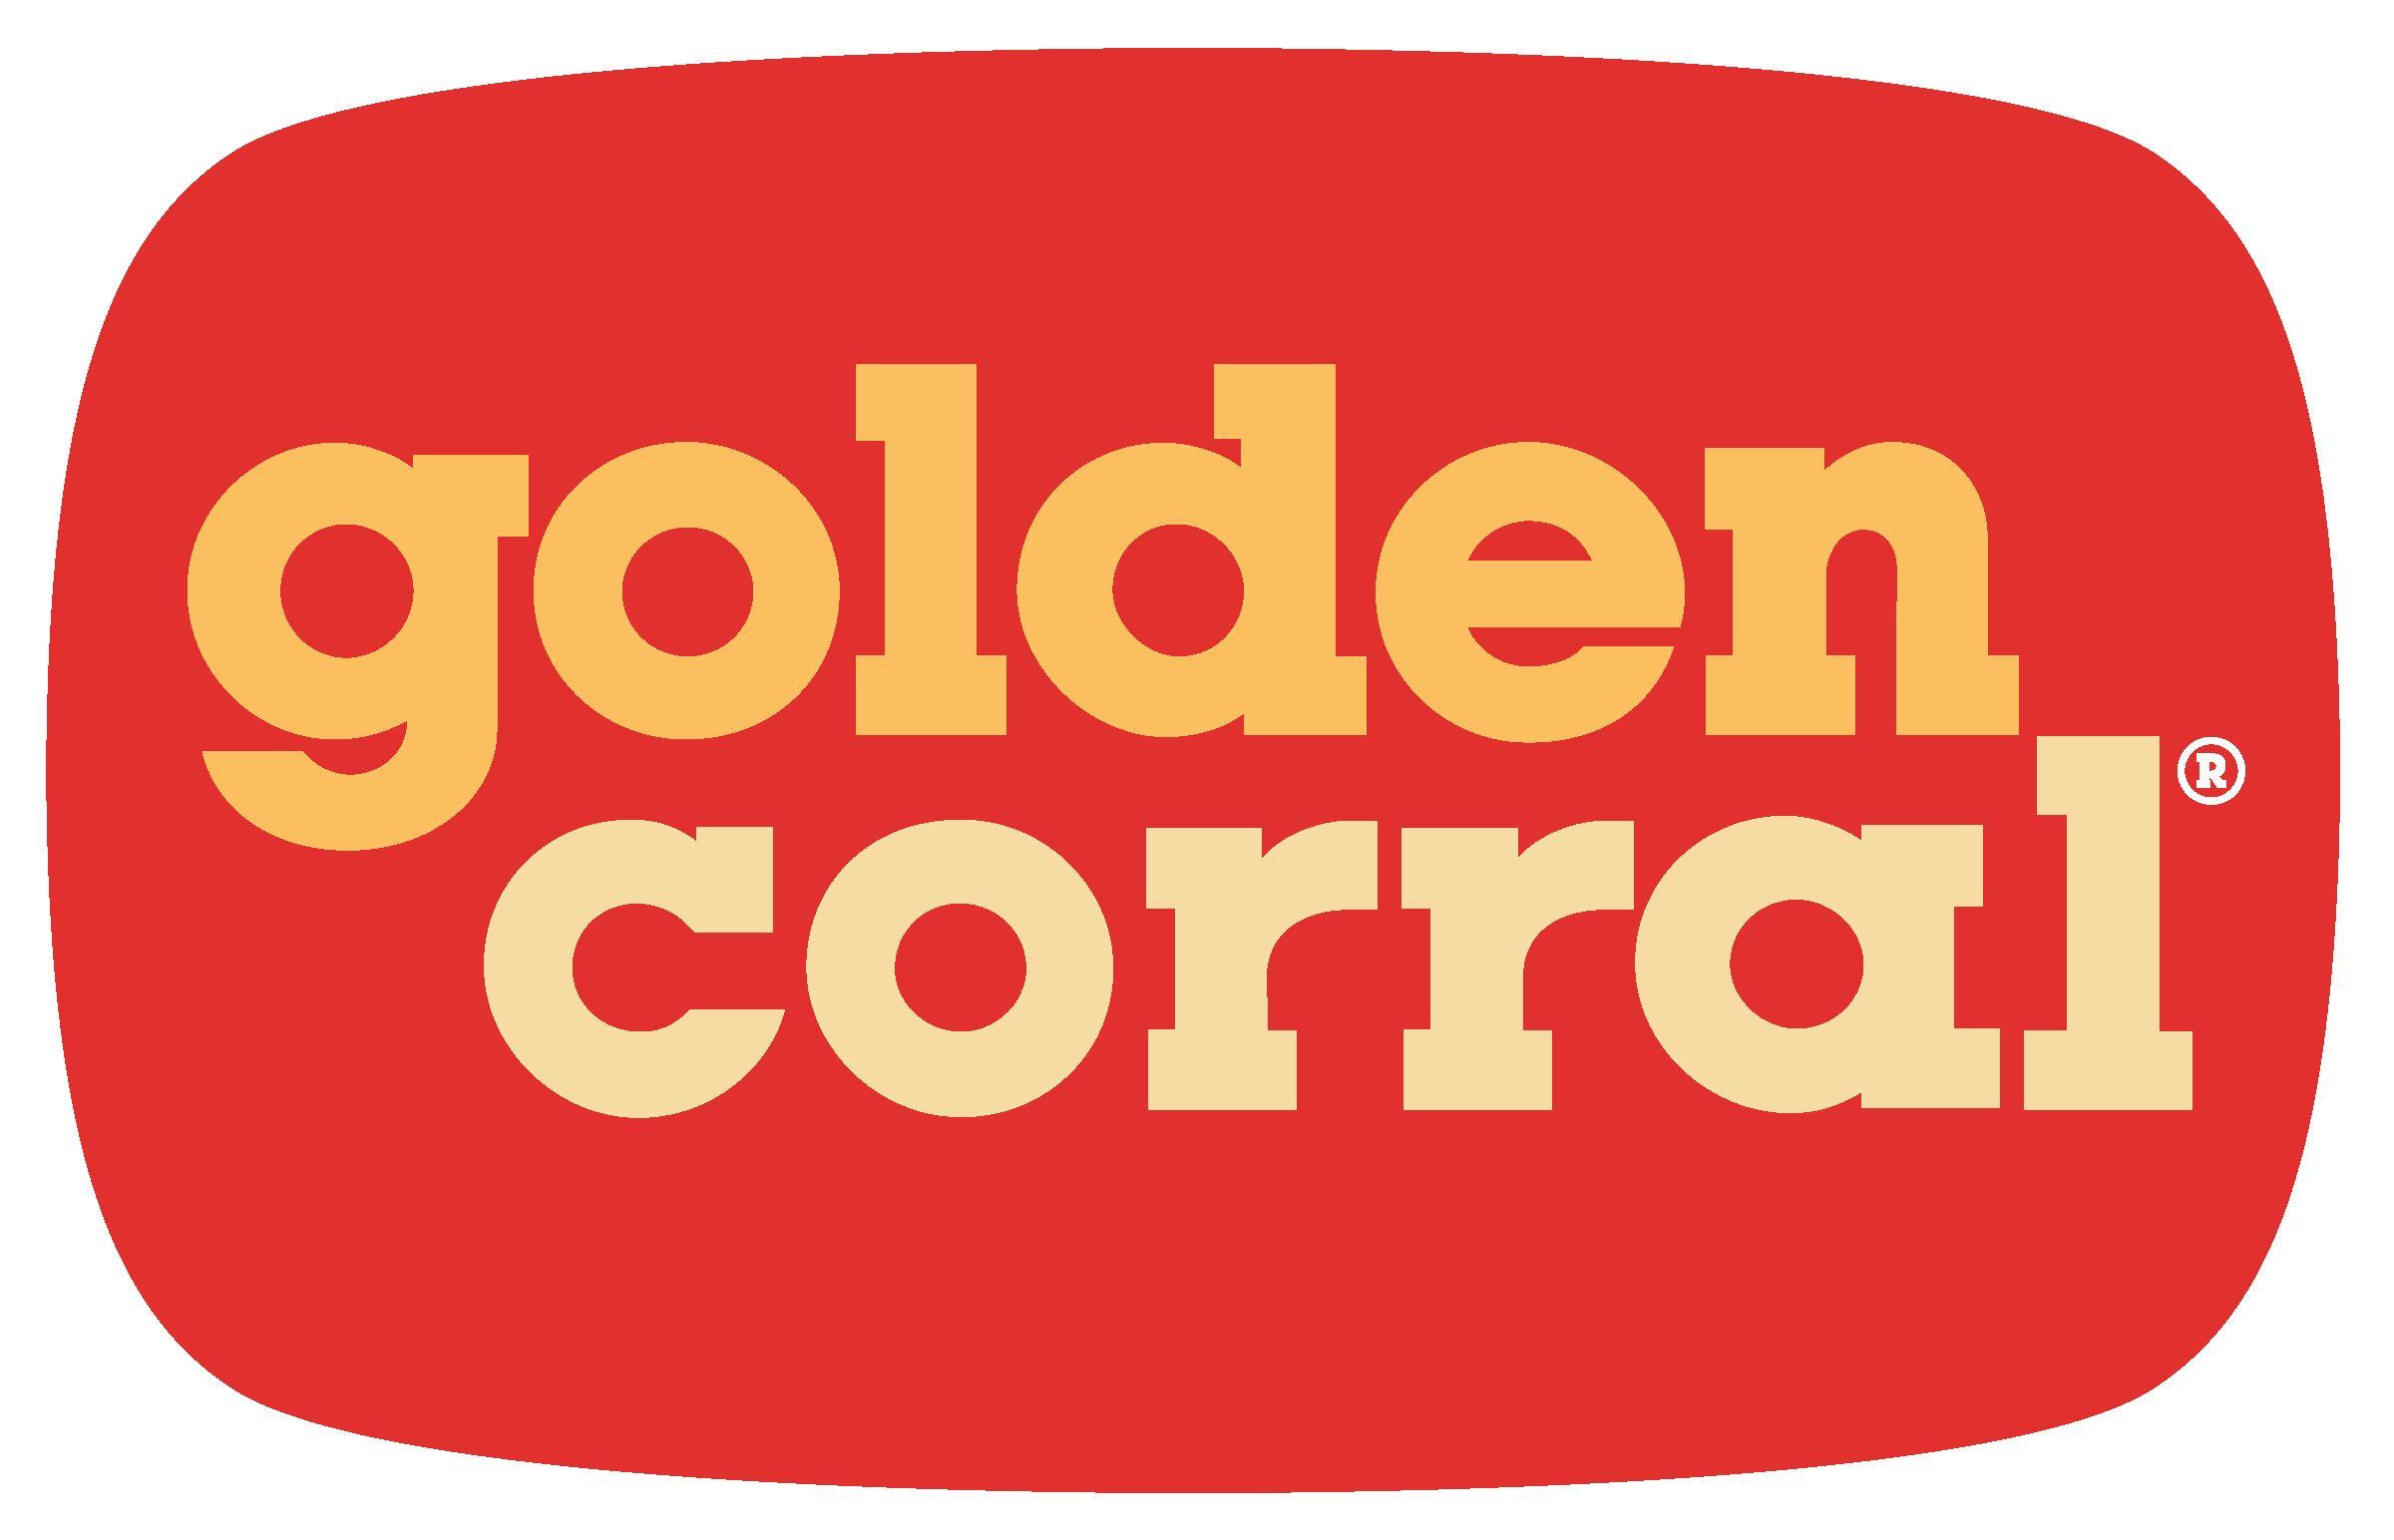 Golden Corral Logo - Golden Corral - America's #1 Buffet and Grill